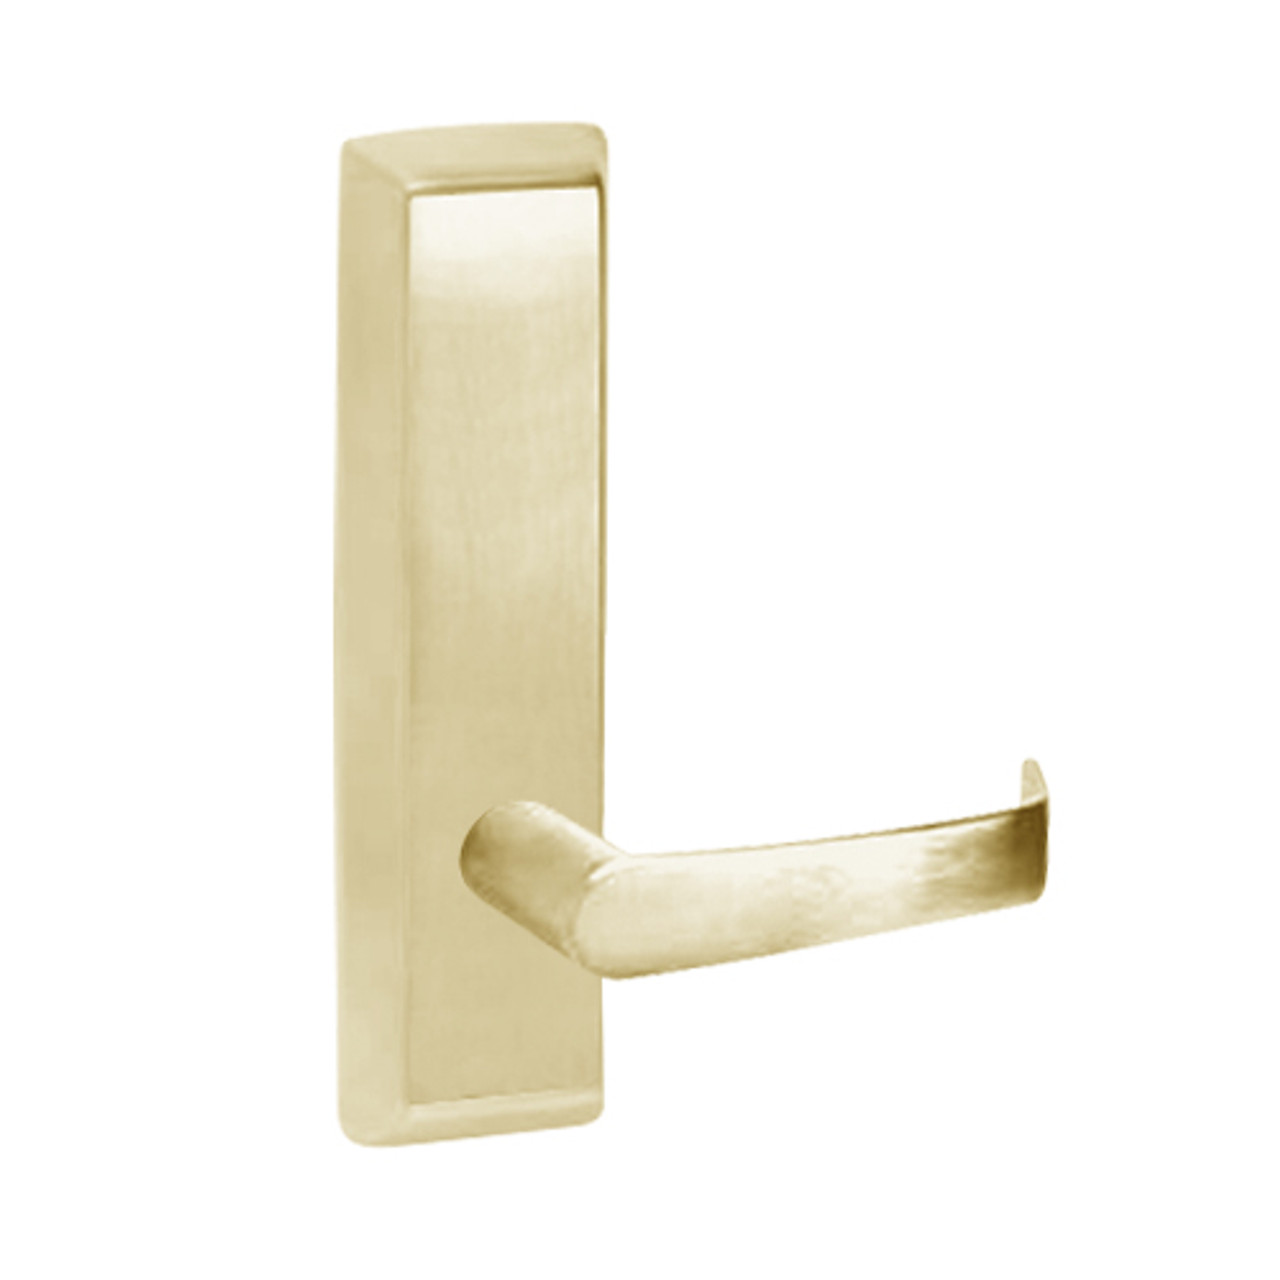 N910-605-RHR Corbin ED5000 Series Exit Device Trim with Passage Newport Lever in Bright Brass Finish